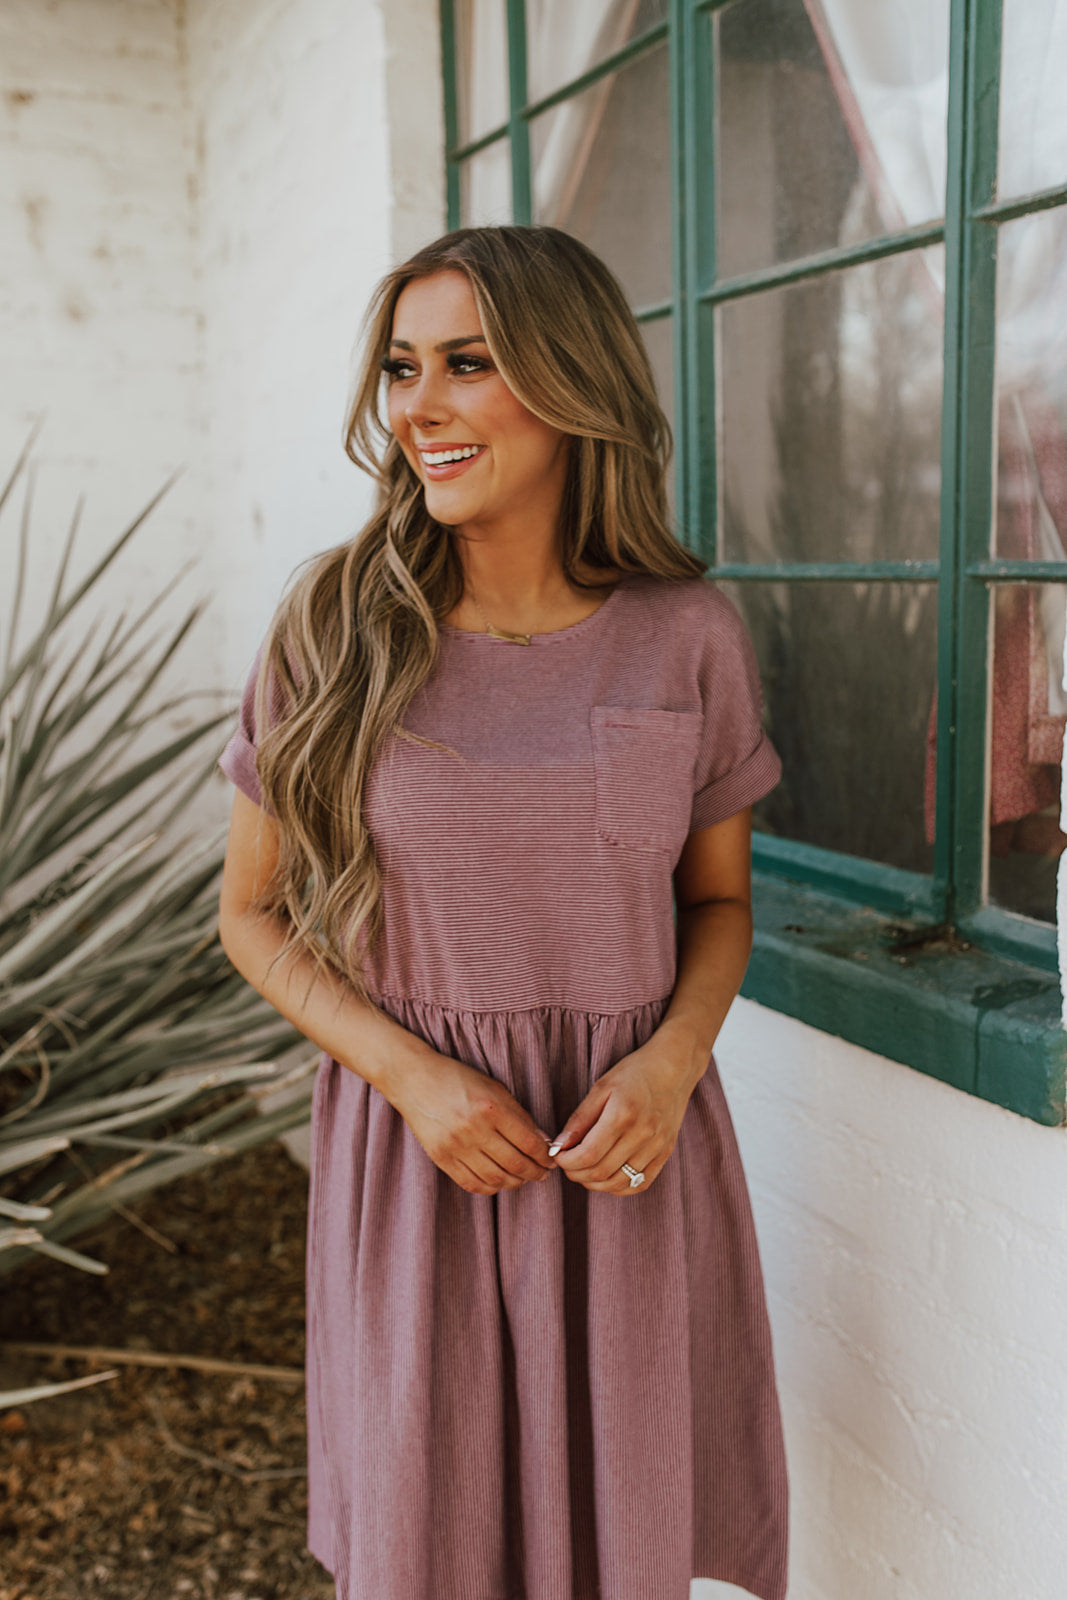 THE BODHI STRIPED BABYDOLL DRESS IN MAUVE